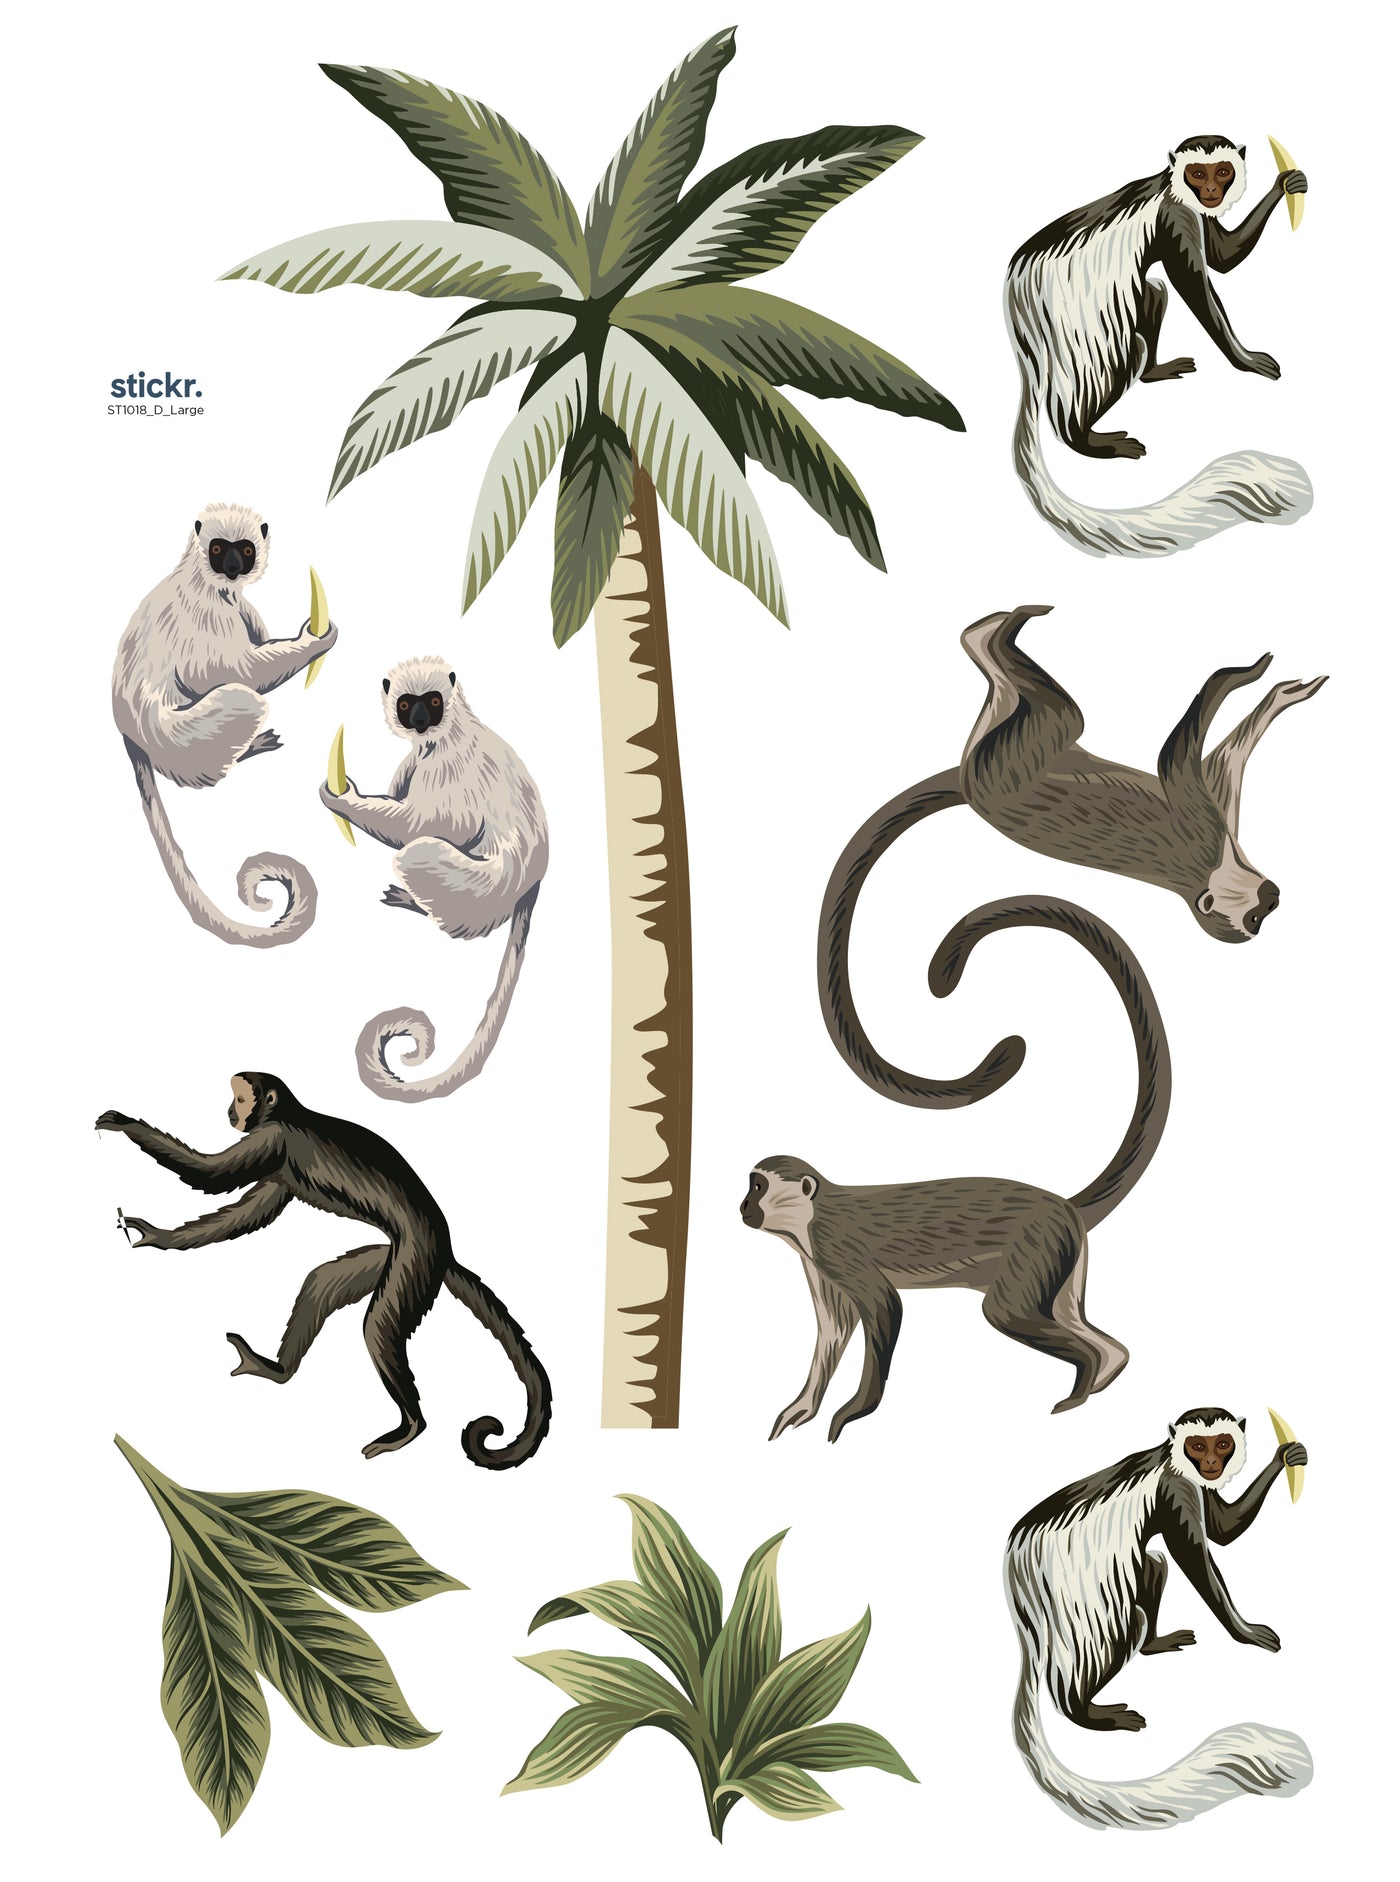 7 Monkey Decals, 1 palm tree, 2 shrubs make up a cheeky monkey large decal set